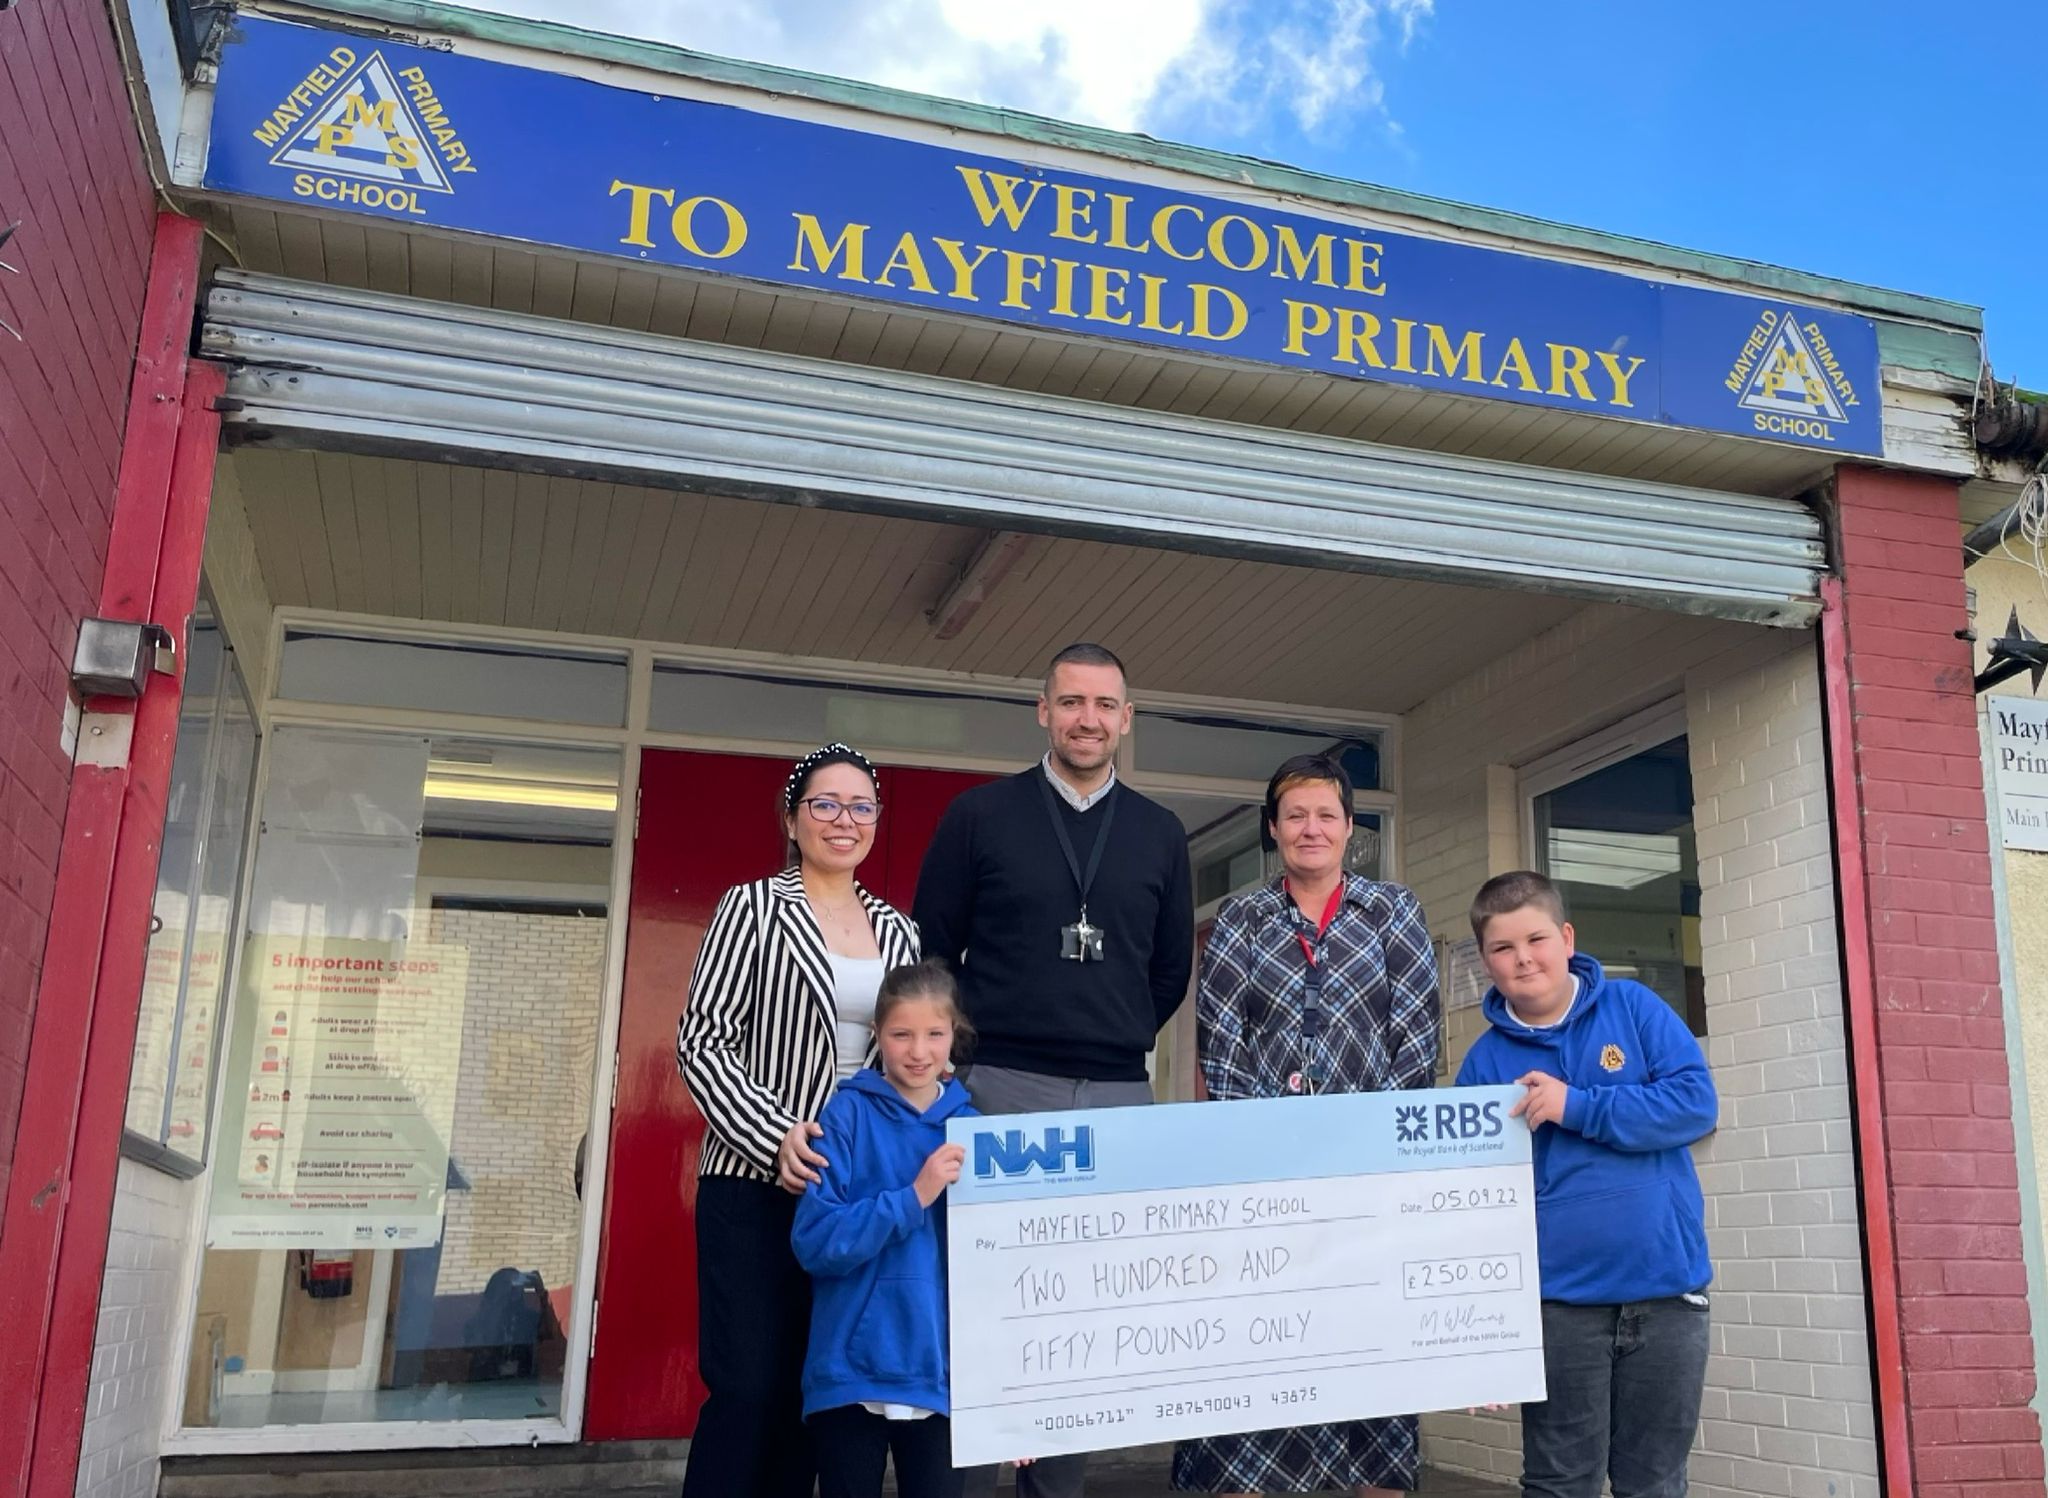 The NWH Group supports the children of Mayfield Primary